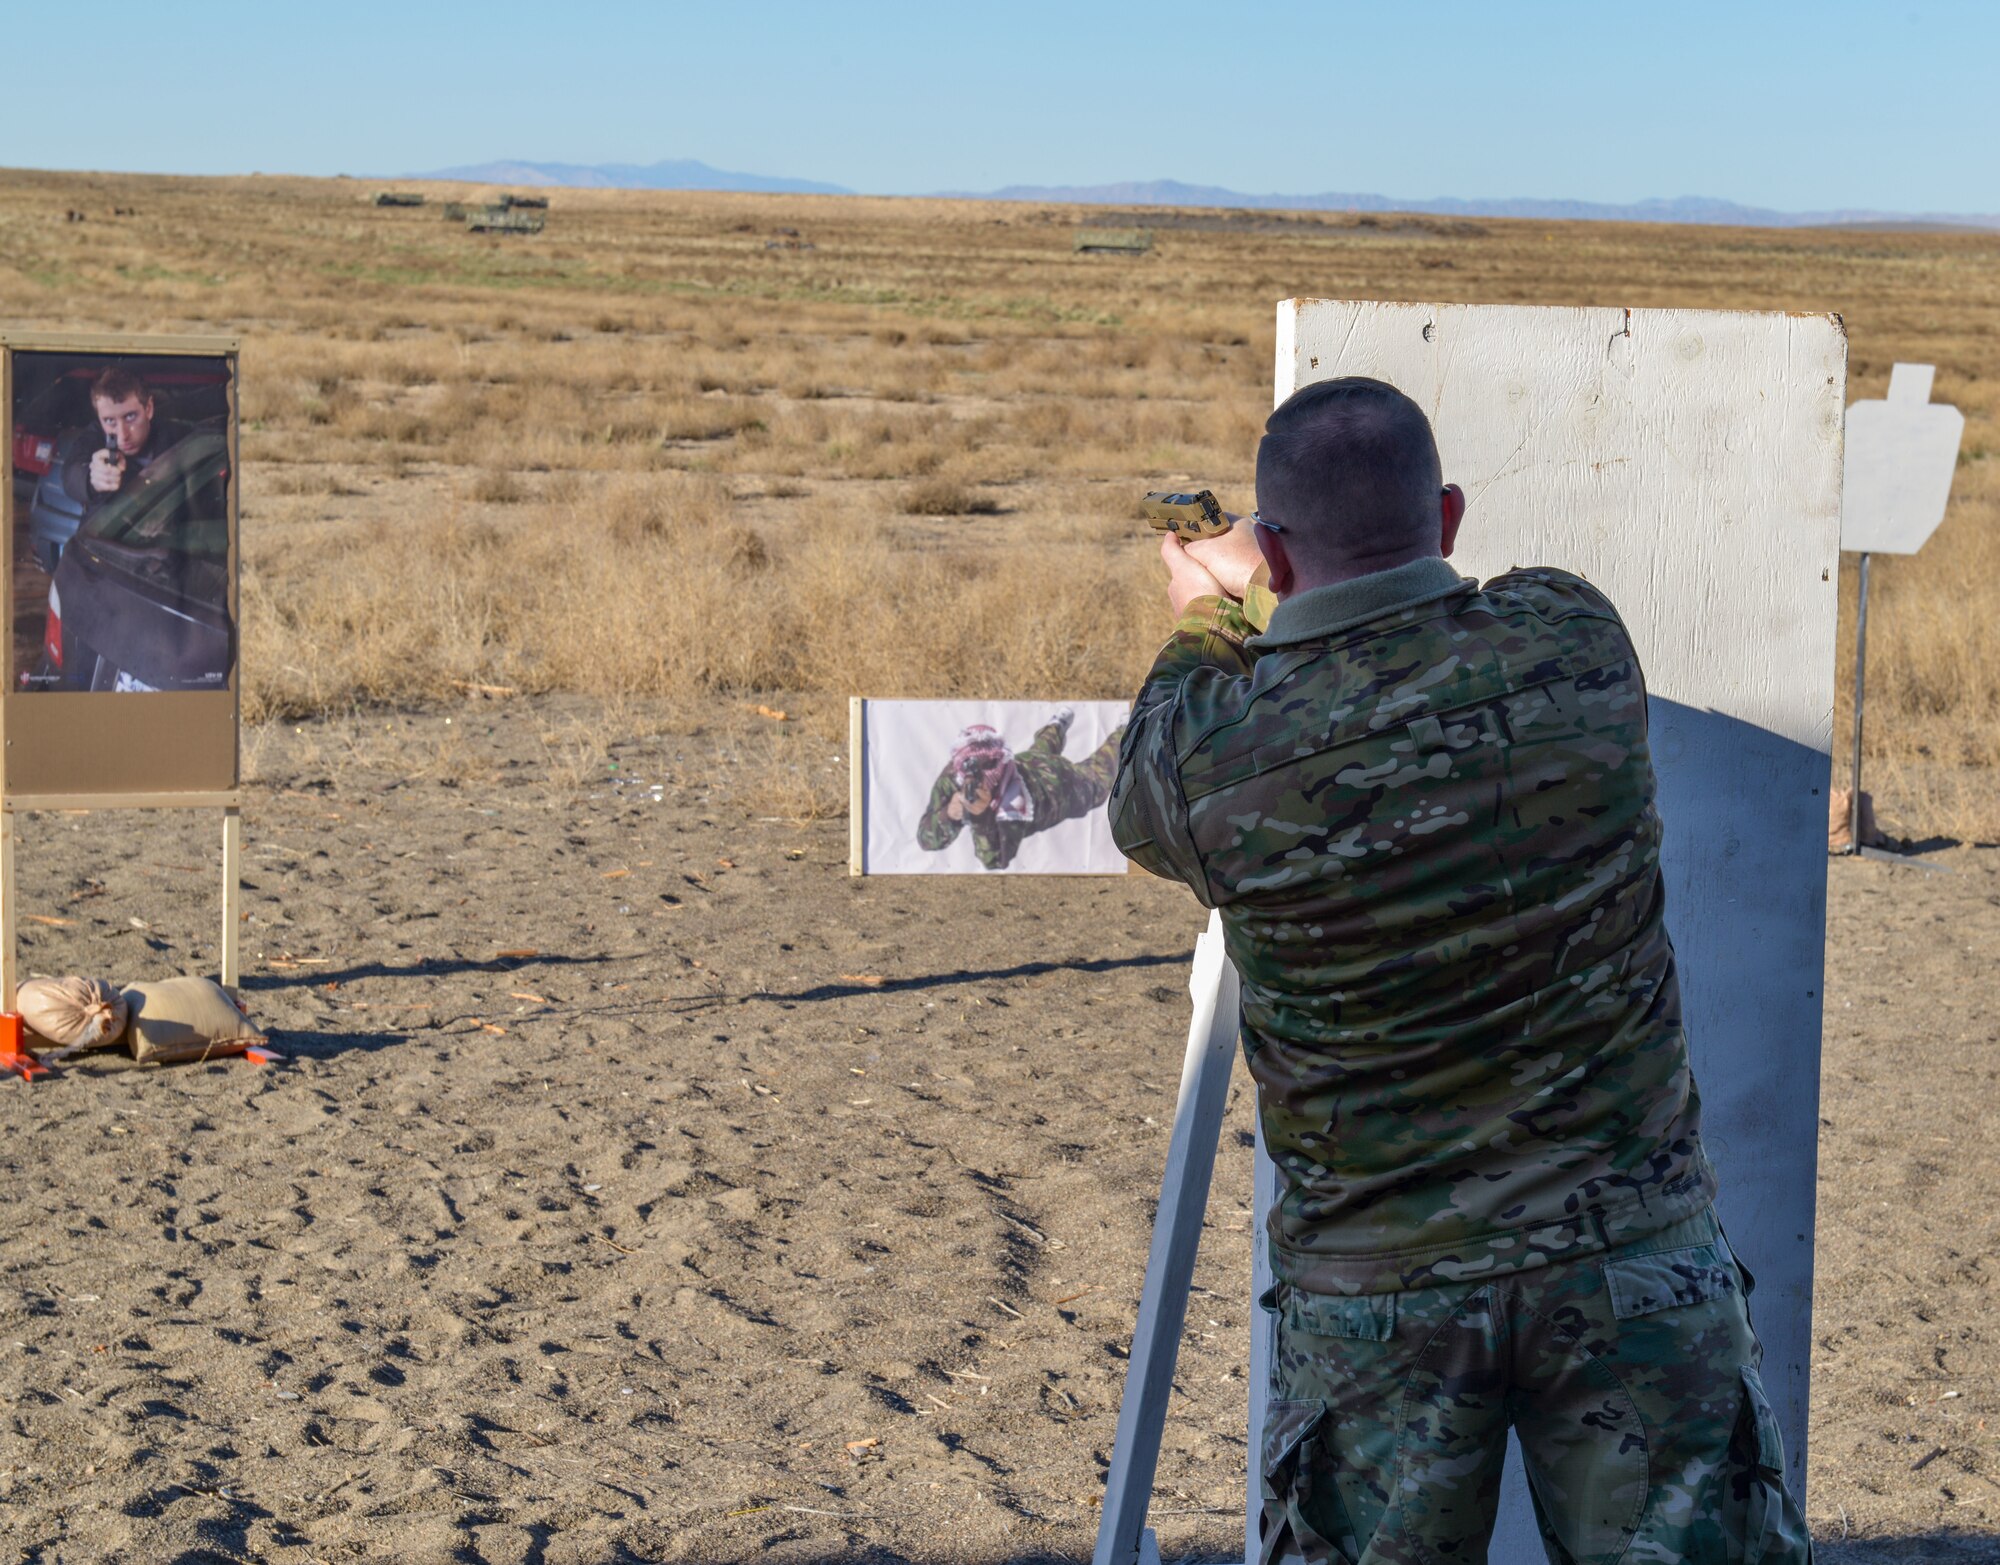 U.S. Air Force Command Chief Master Sgt. David Wade, Air Combat Command, shoots an M18 pistol on Mountain Home Air Force Base, Idaho, Nov. 8, 2021. The acquisition of the M18 pistol is part of an Air Force wide effort to modernize the force.